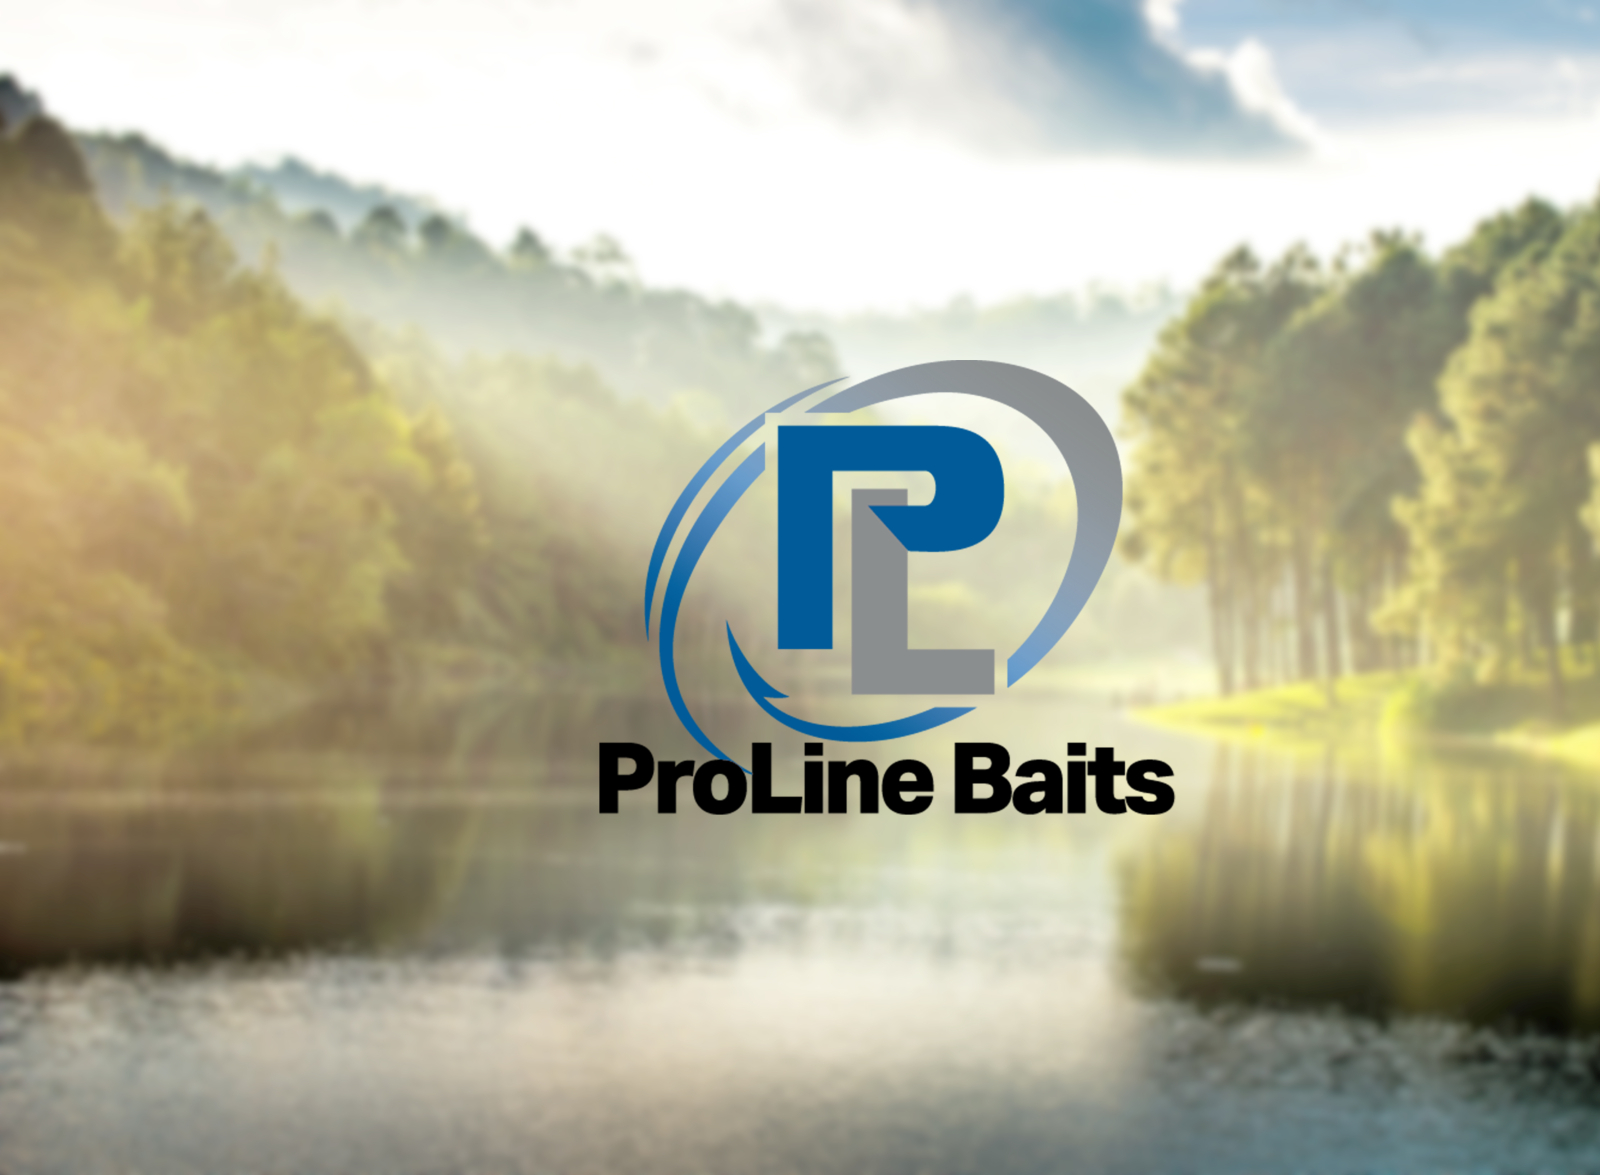 ProLine Baits logo design by Heather Marie Schiefer on Dribbble